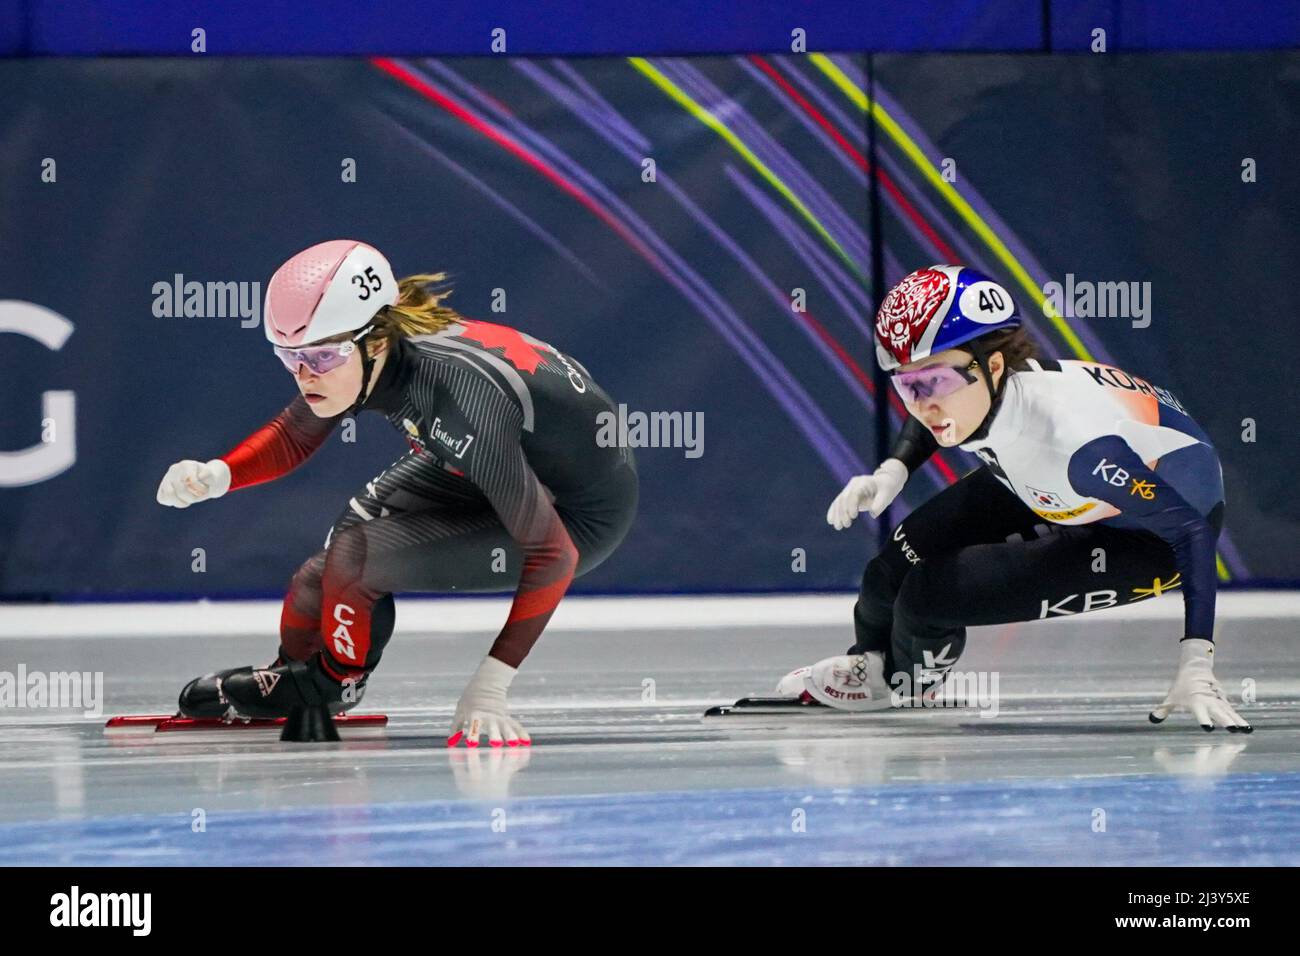 MONTREAL, CANADA - APRIL 10: Kim Boutin of Canada and Minjeong Choi of the Republic of Korea during Day 3 of the ISU World Short Track Championships at the Maurice Richard Arena on April 10, 2022 in Montreal, Canada (Photo by Andre Weening/Orange Pictures) Stock Photo